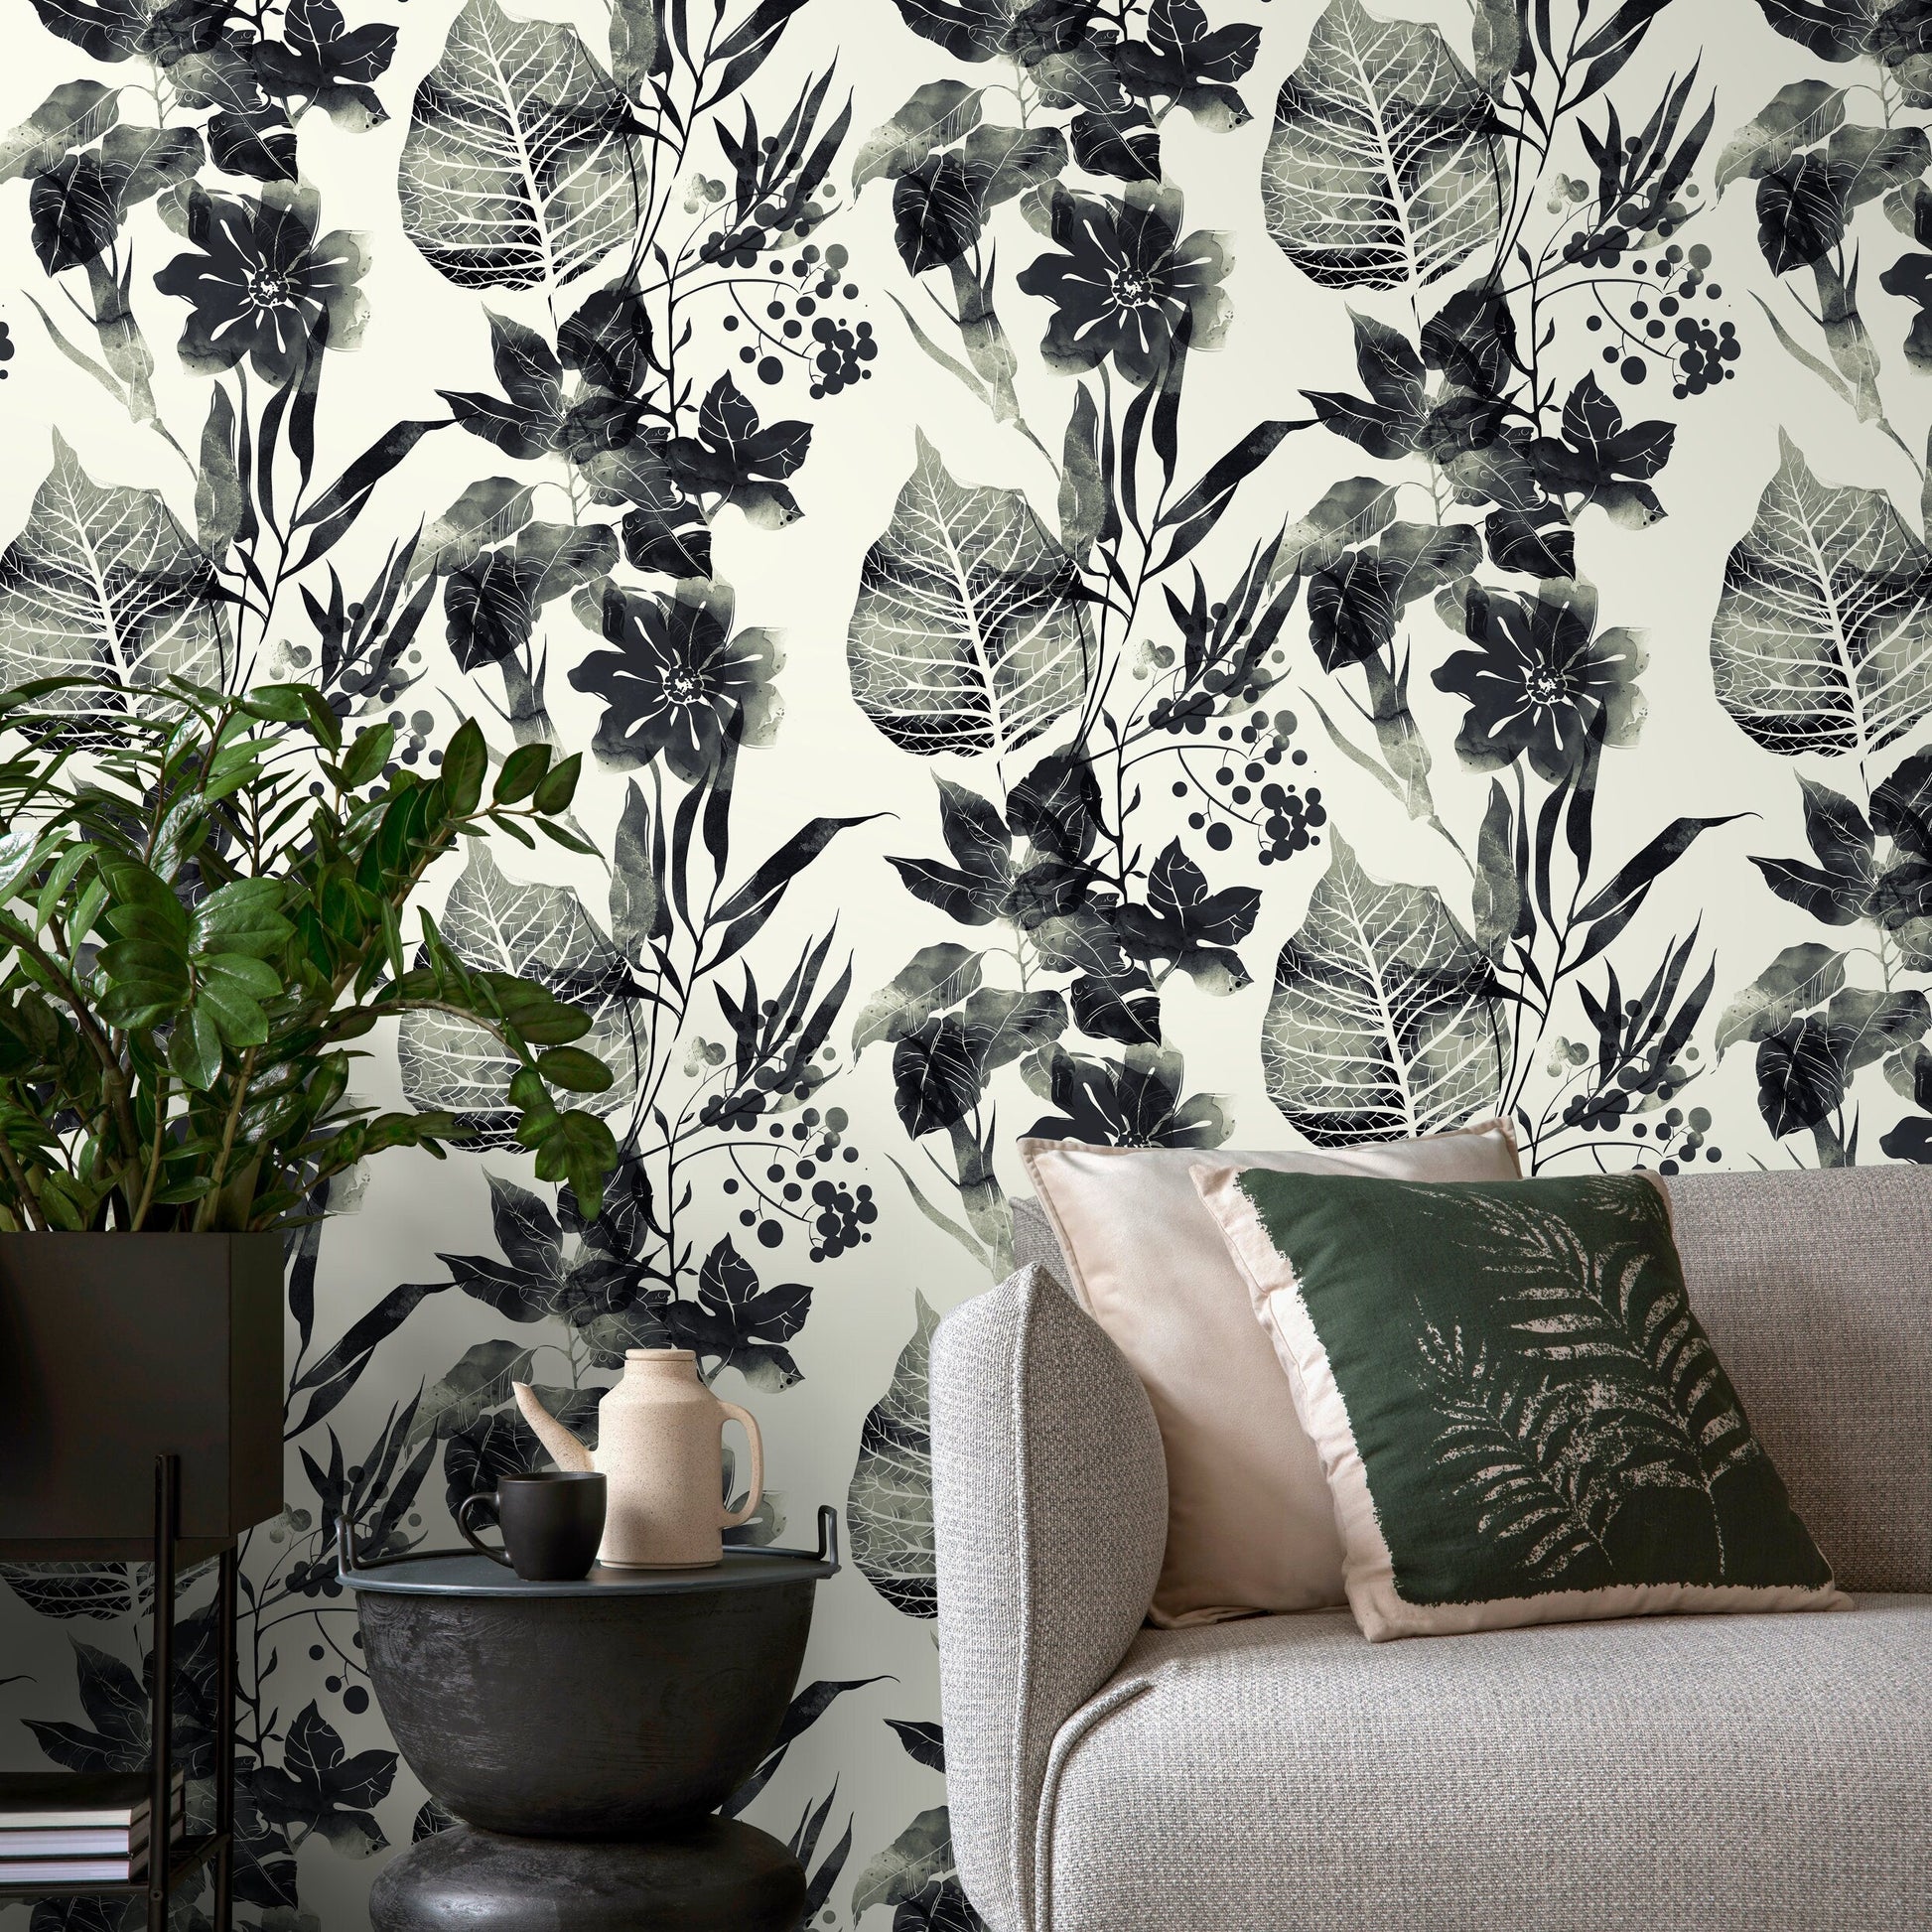 Watercolor Flowers Black and White Wallpaper, Self-adhesive Removable Wallpaper, Peel and Stick Fabric Wallpaper, Wallpaper - B040